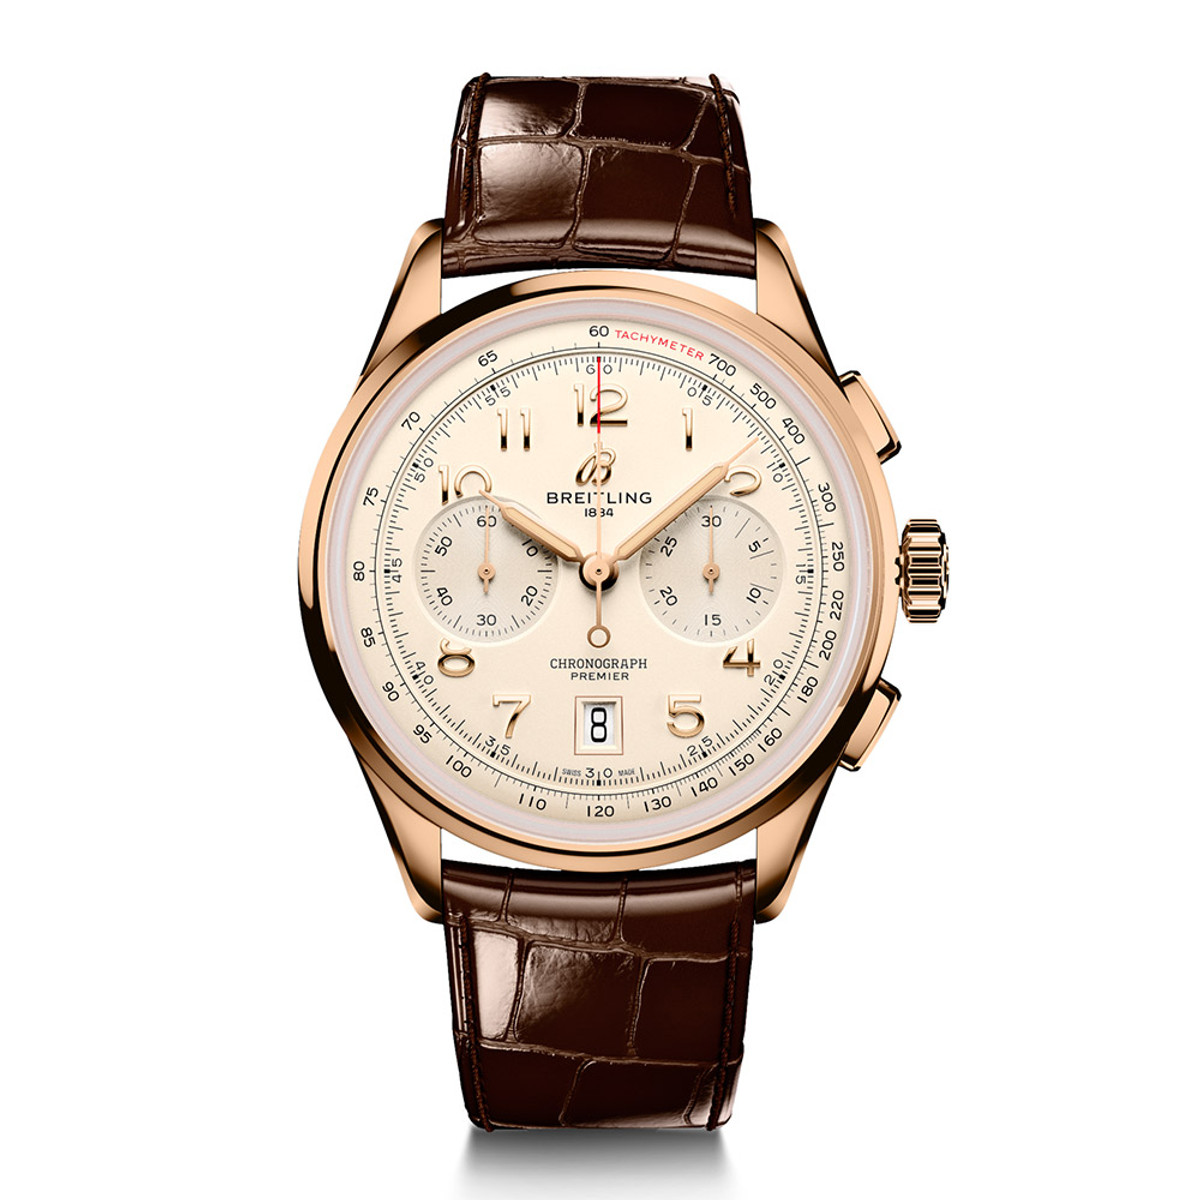 Breitling Premier 42 B01 Automatic Chronograph 18K Rose Gold RB0145371G1P1-51886 Product Image